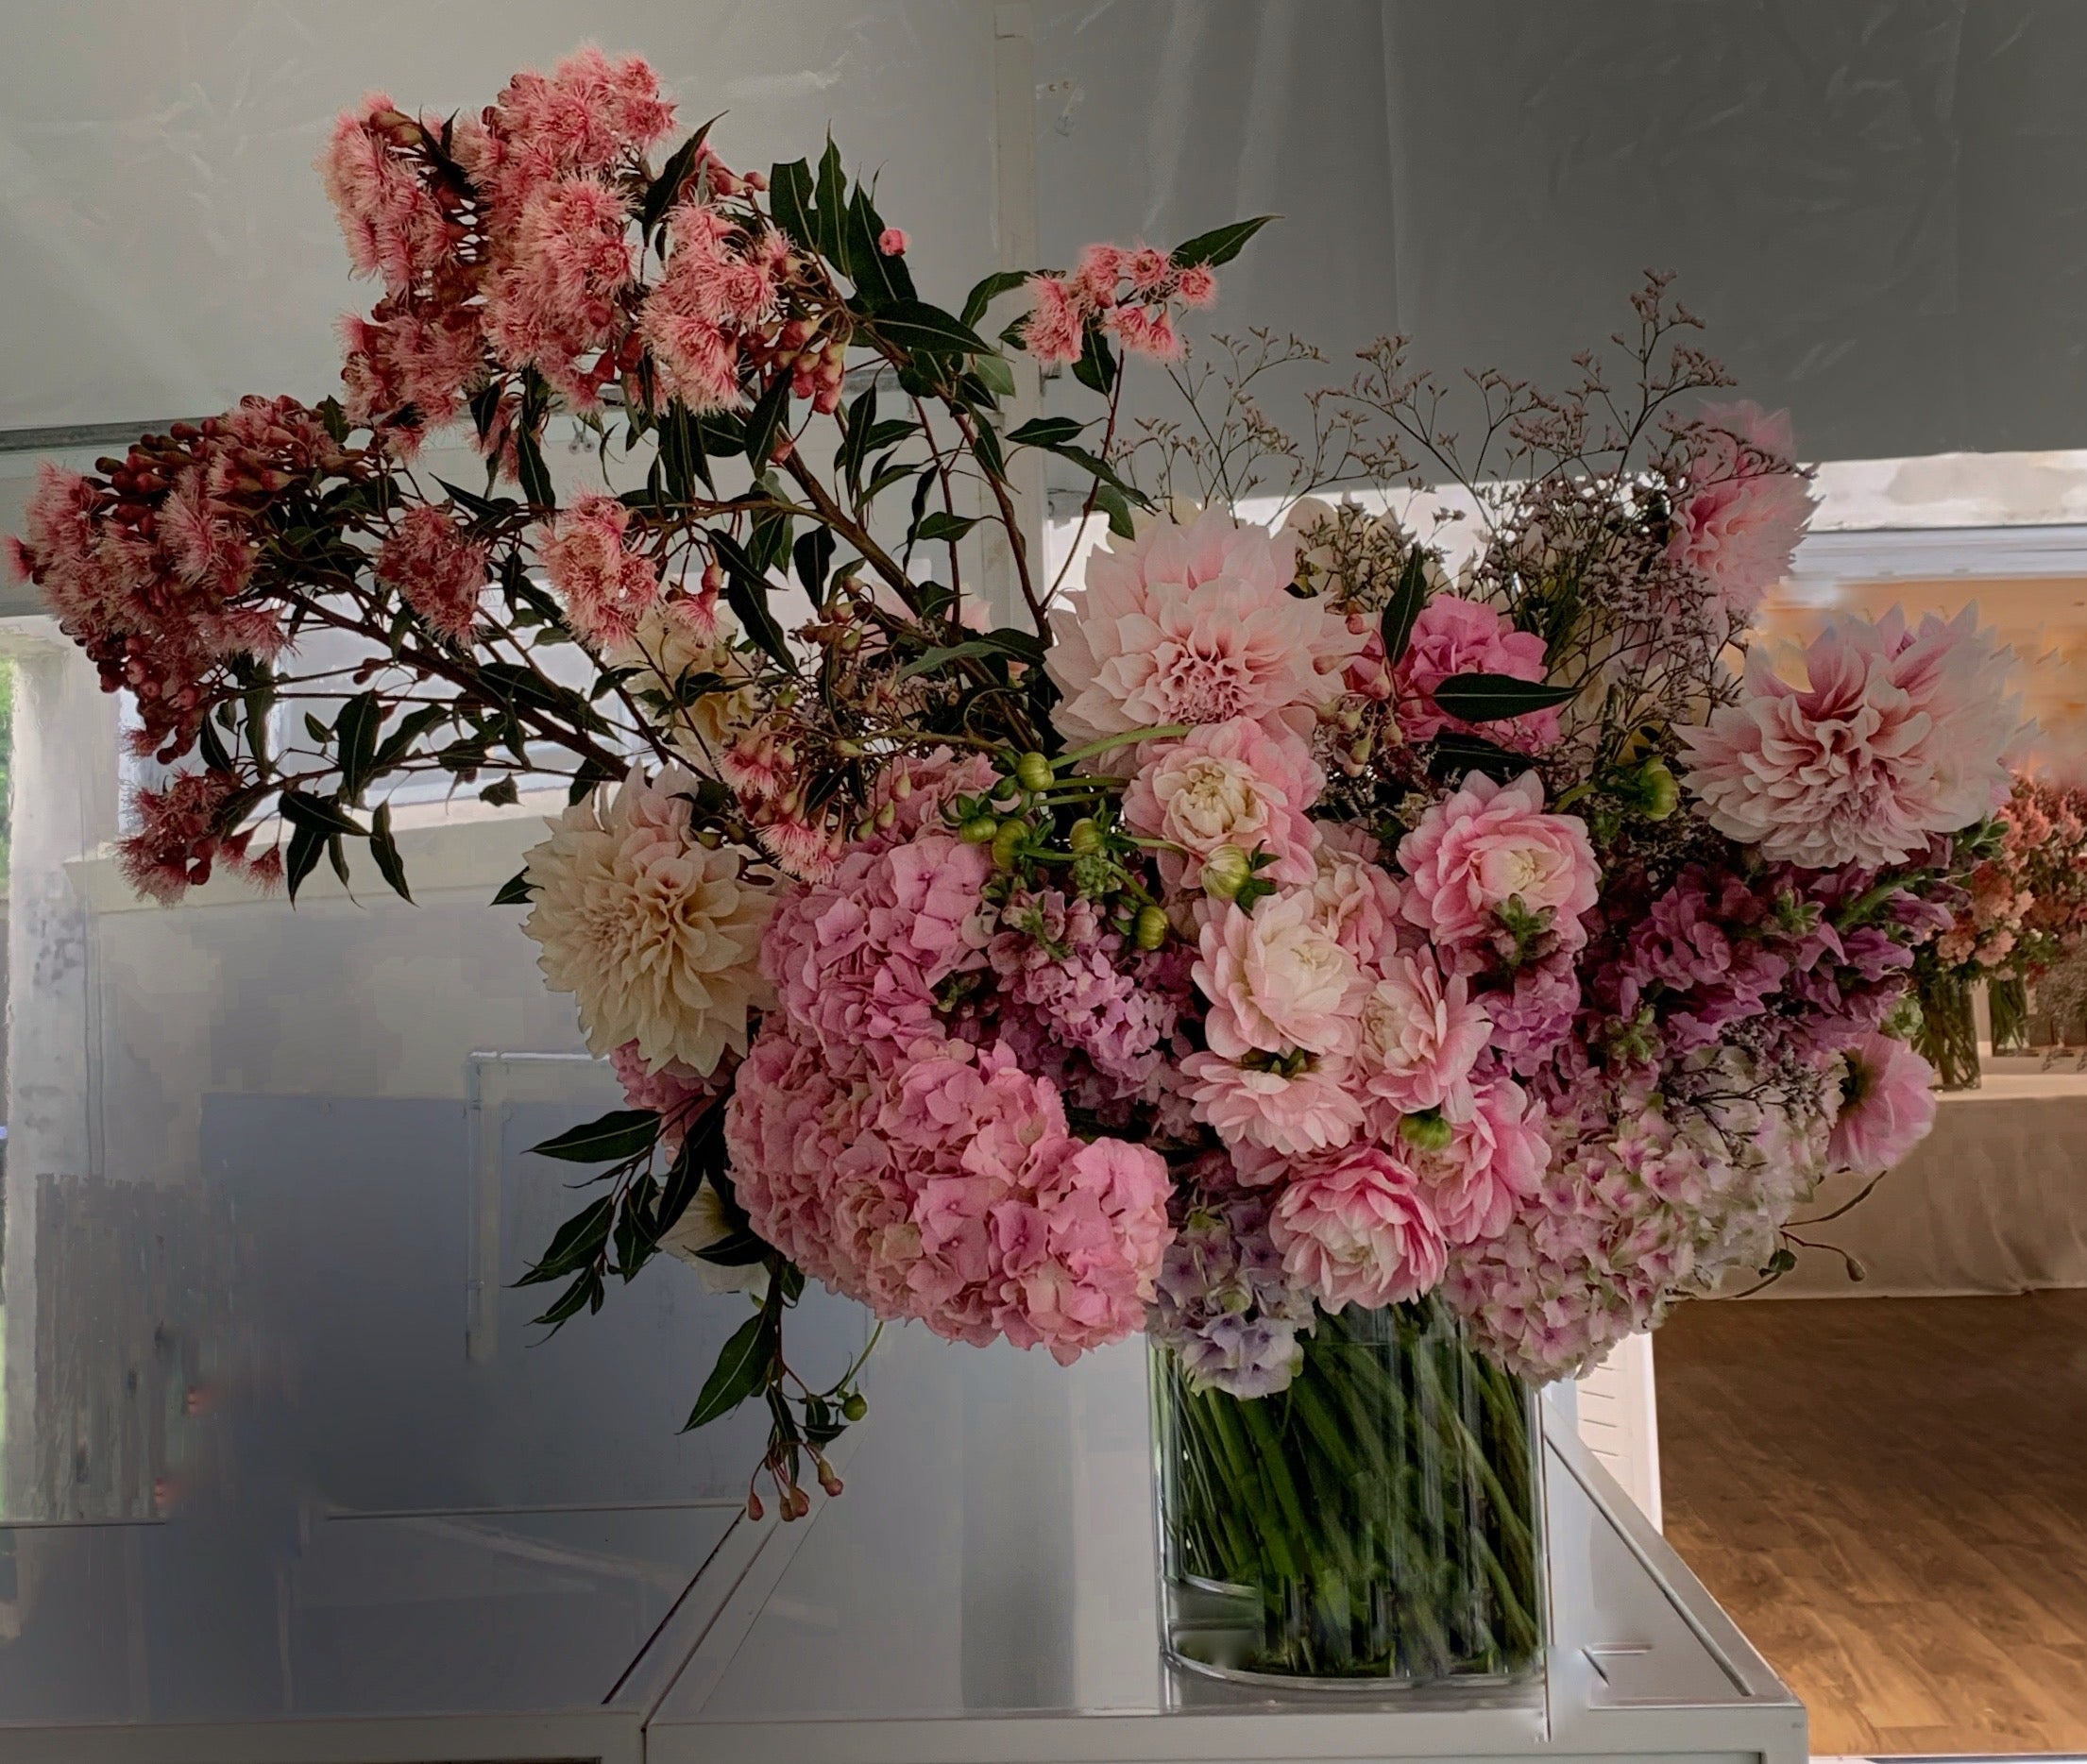 A large bunch of designer pink flowers in a glass vase at an event.